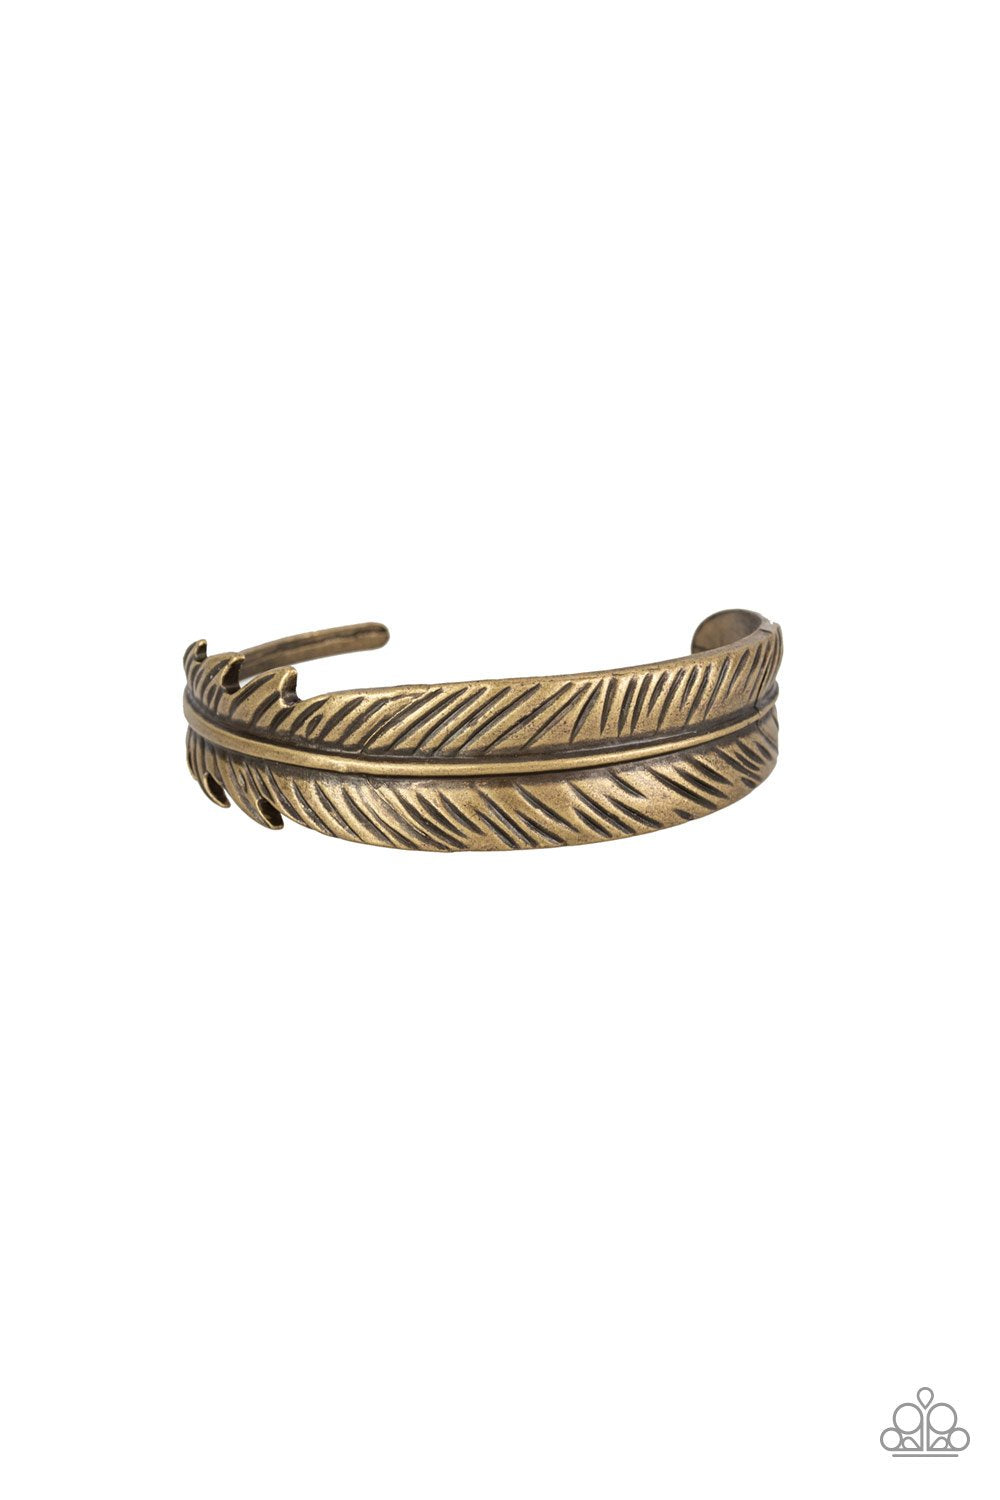 Paparazzi Accessories  - Tran-QUILL-ity #B178 - Brass Feather Bracelet